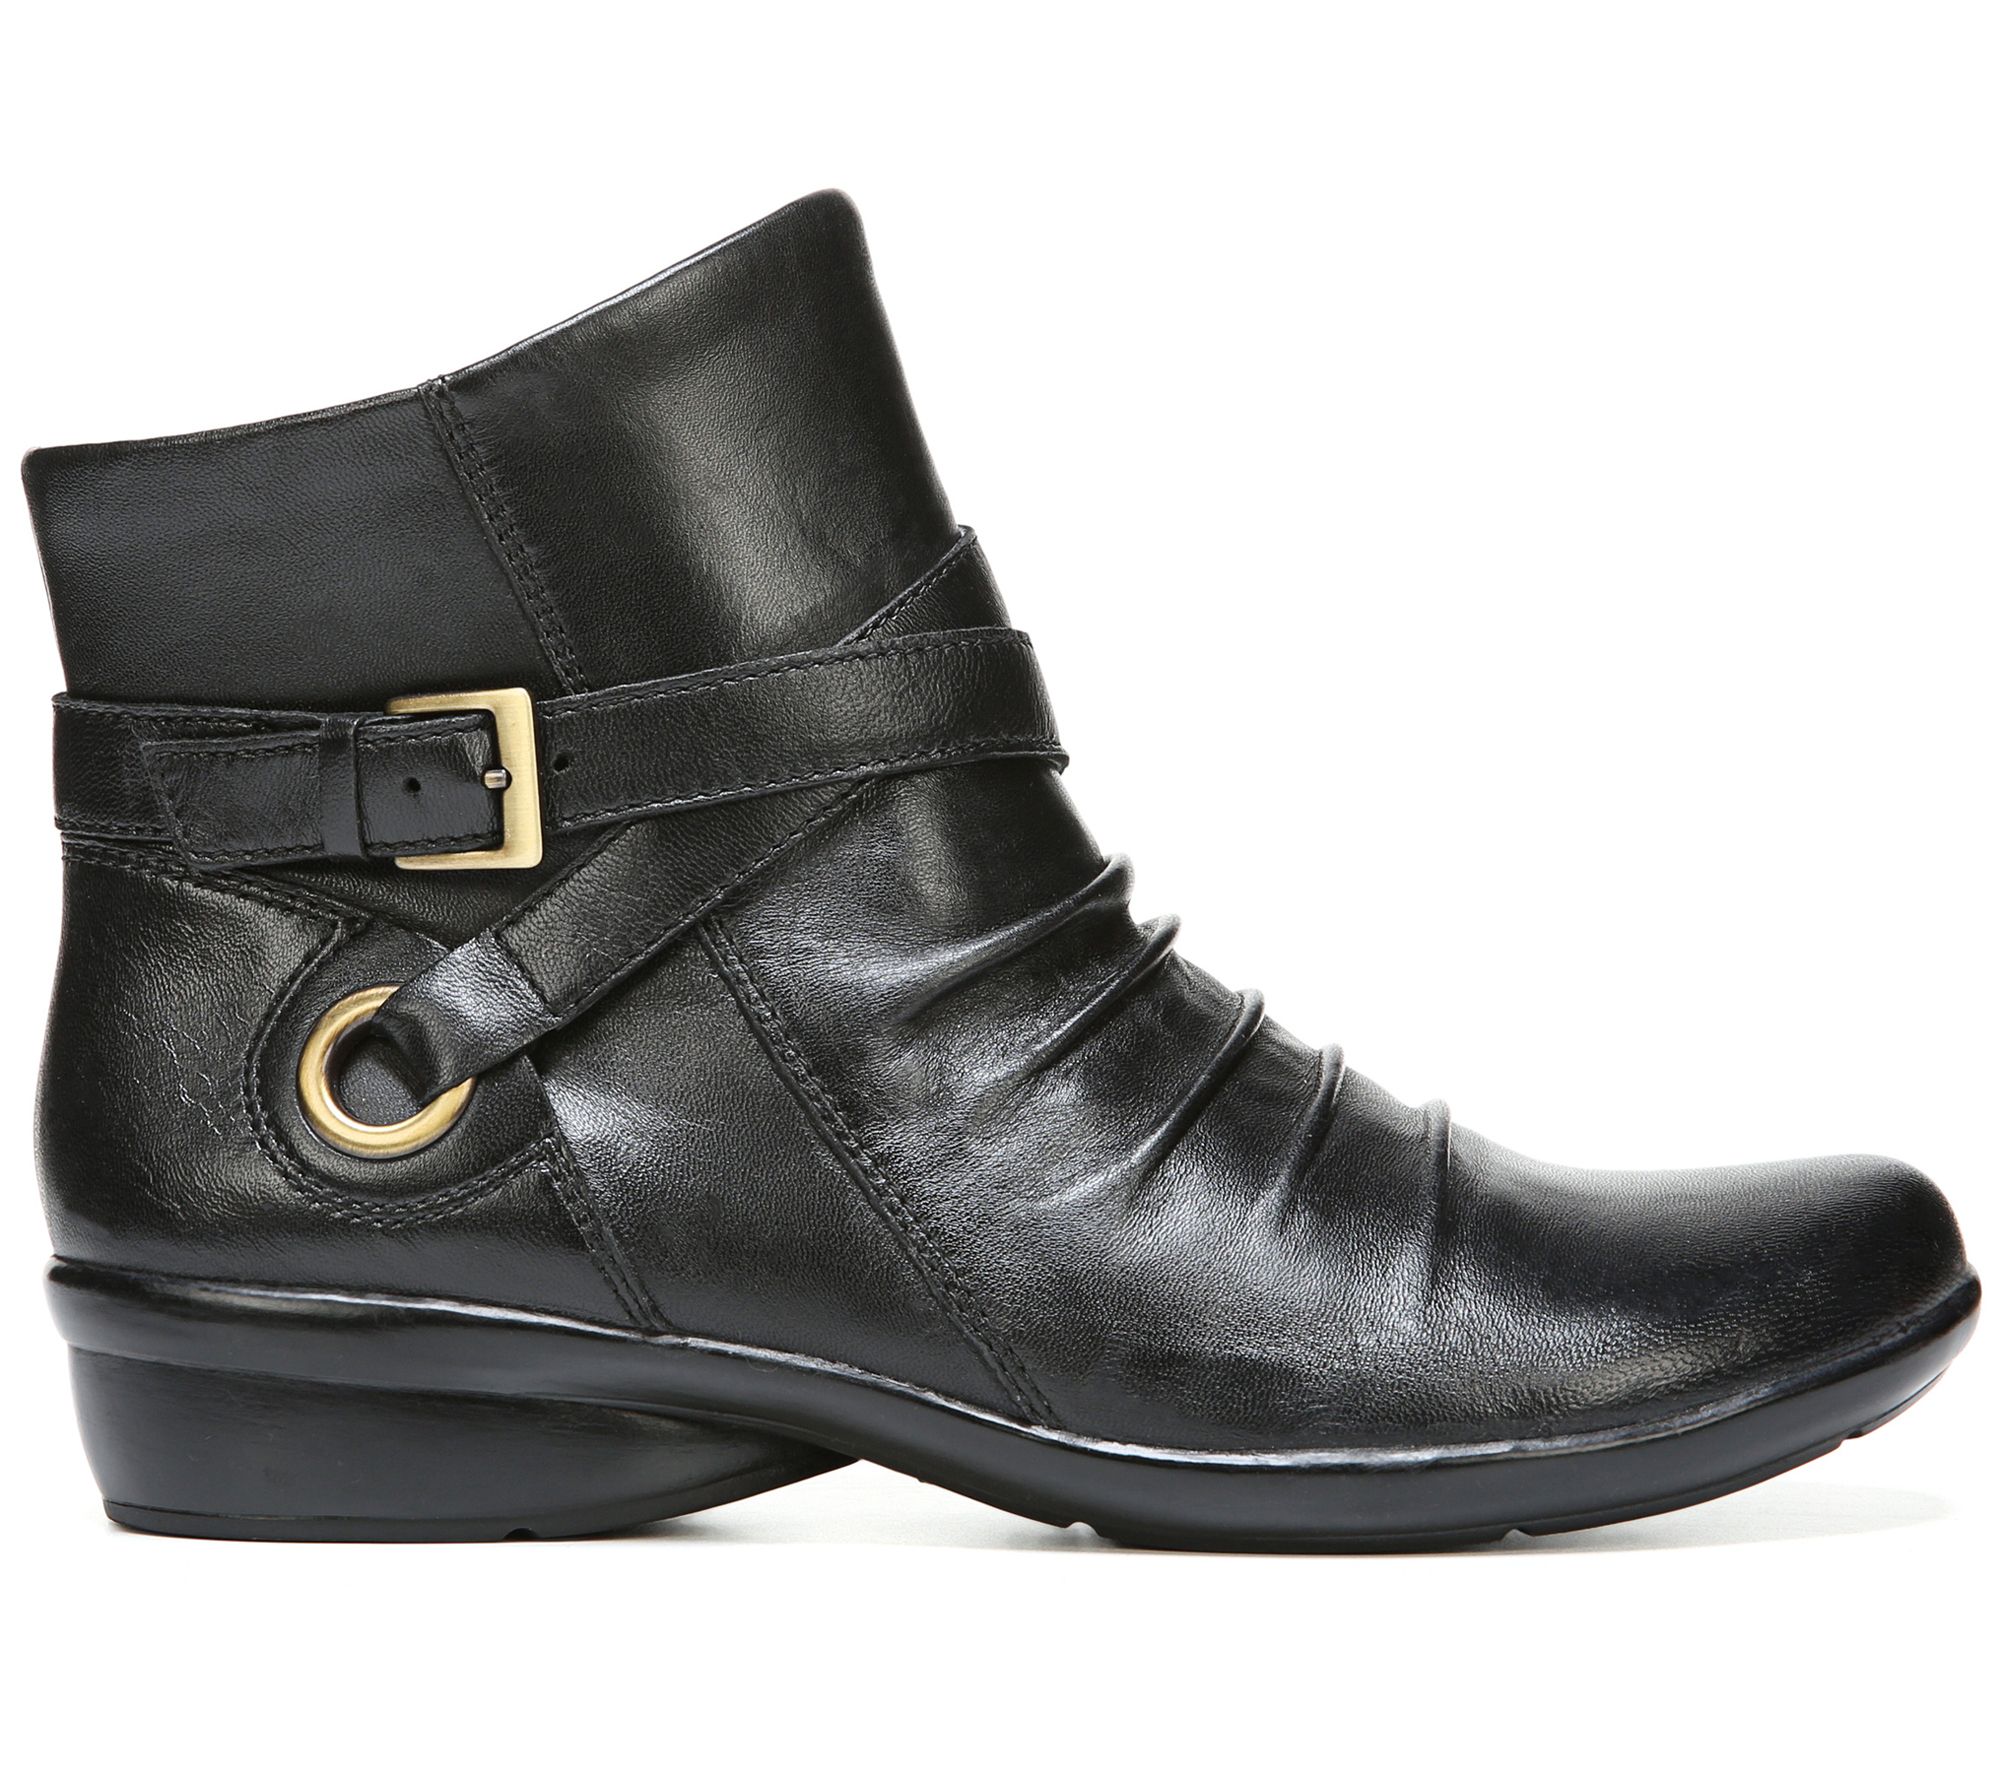 Naturalizer Leather Ankle Boots - Cycle - QVC.com